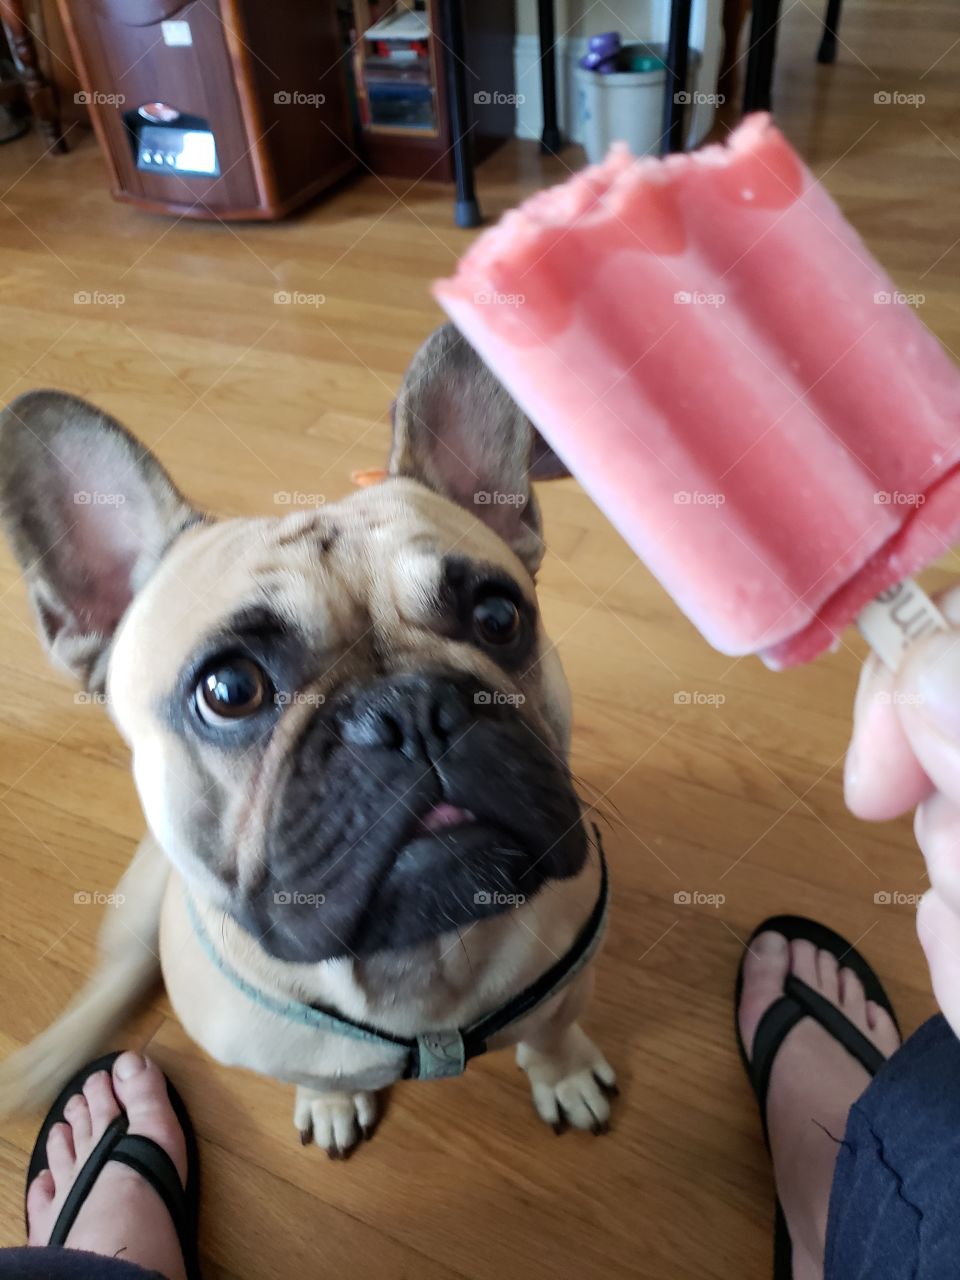 sorry, cant have this popsicle